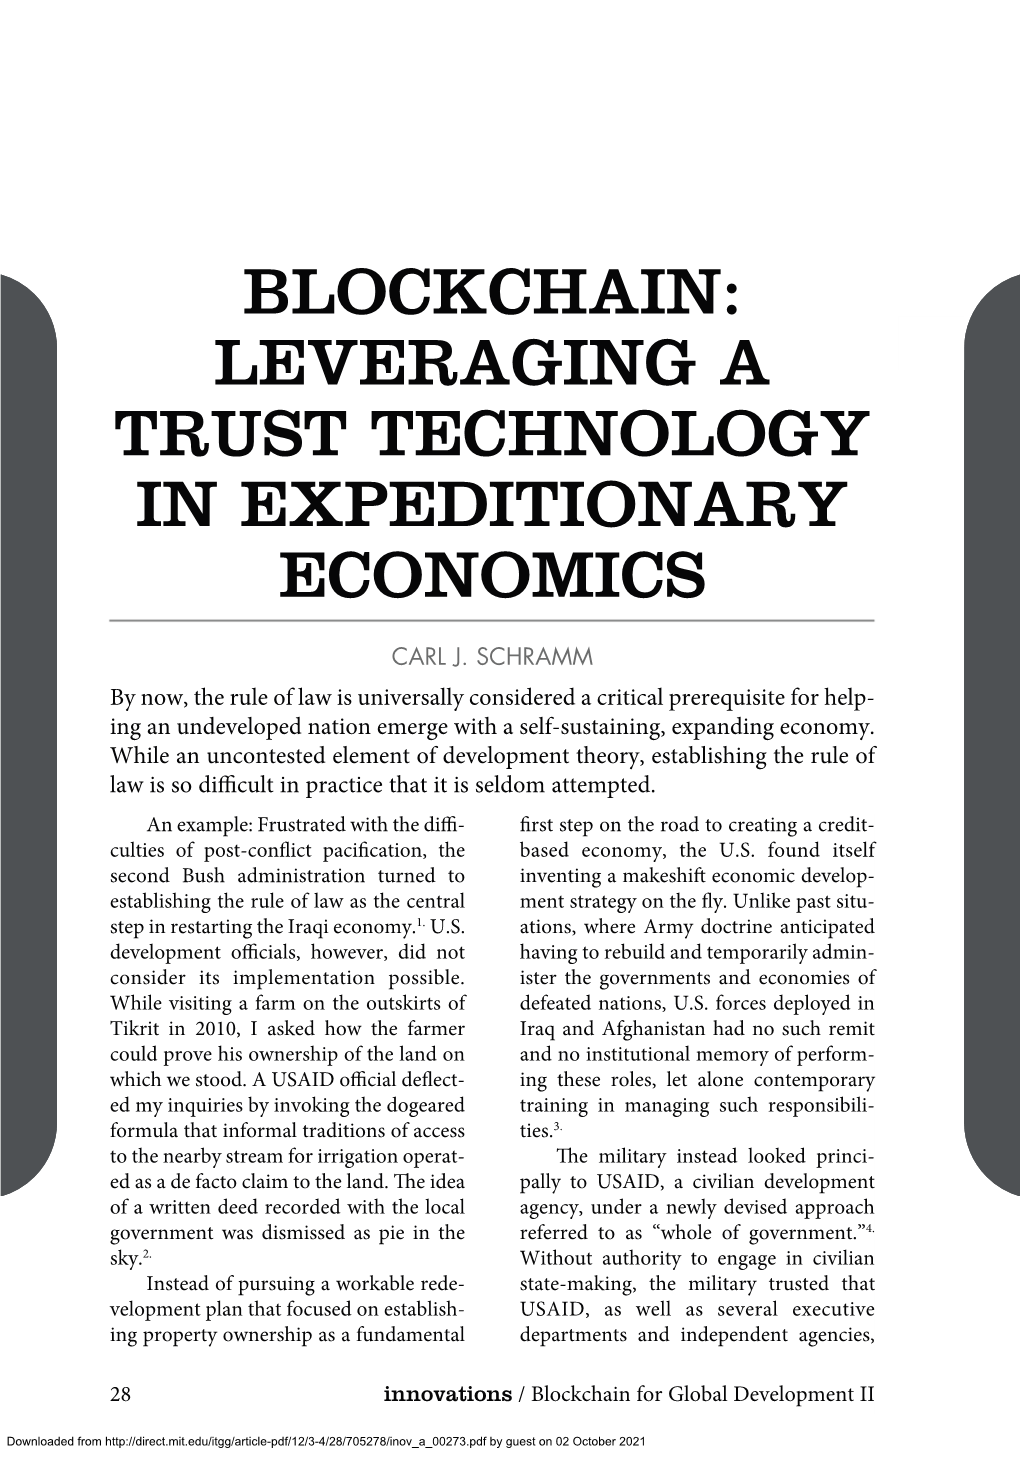 Leveraging a Trust Technology in Expeditionary Economics